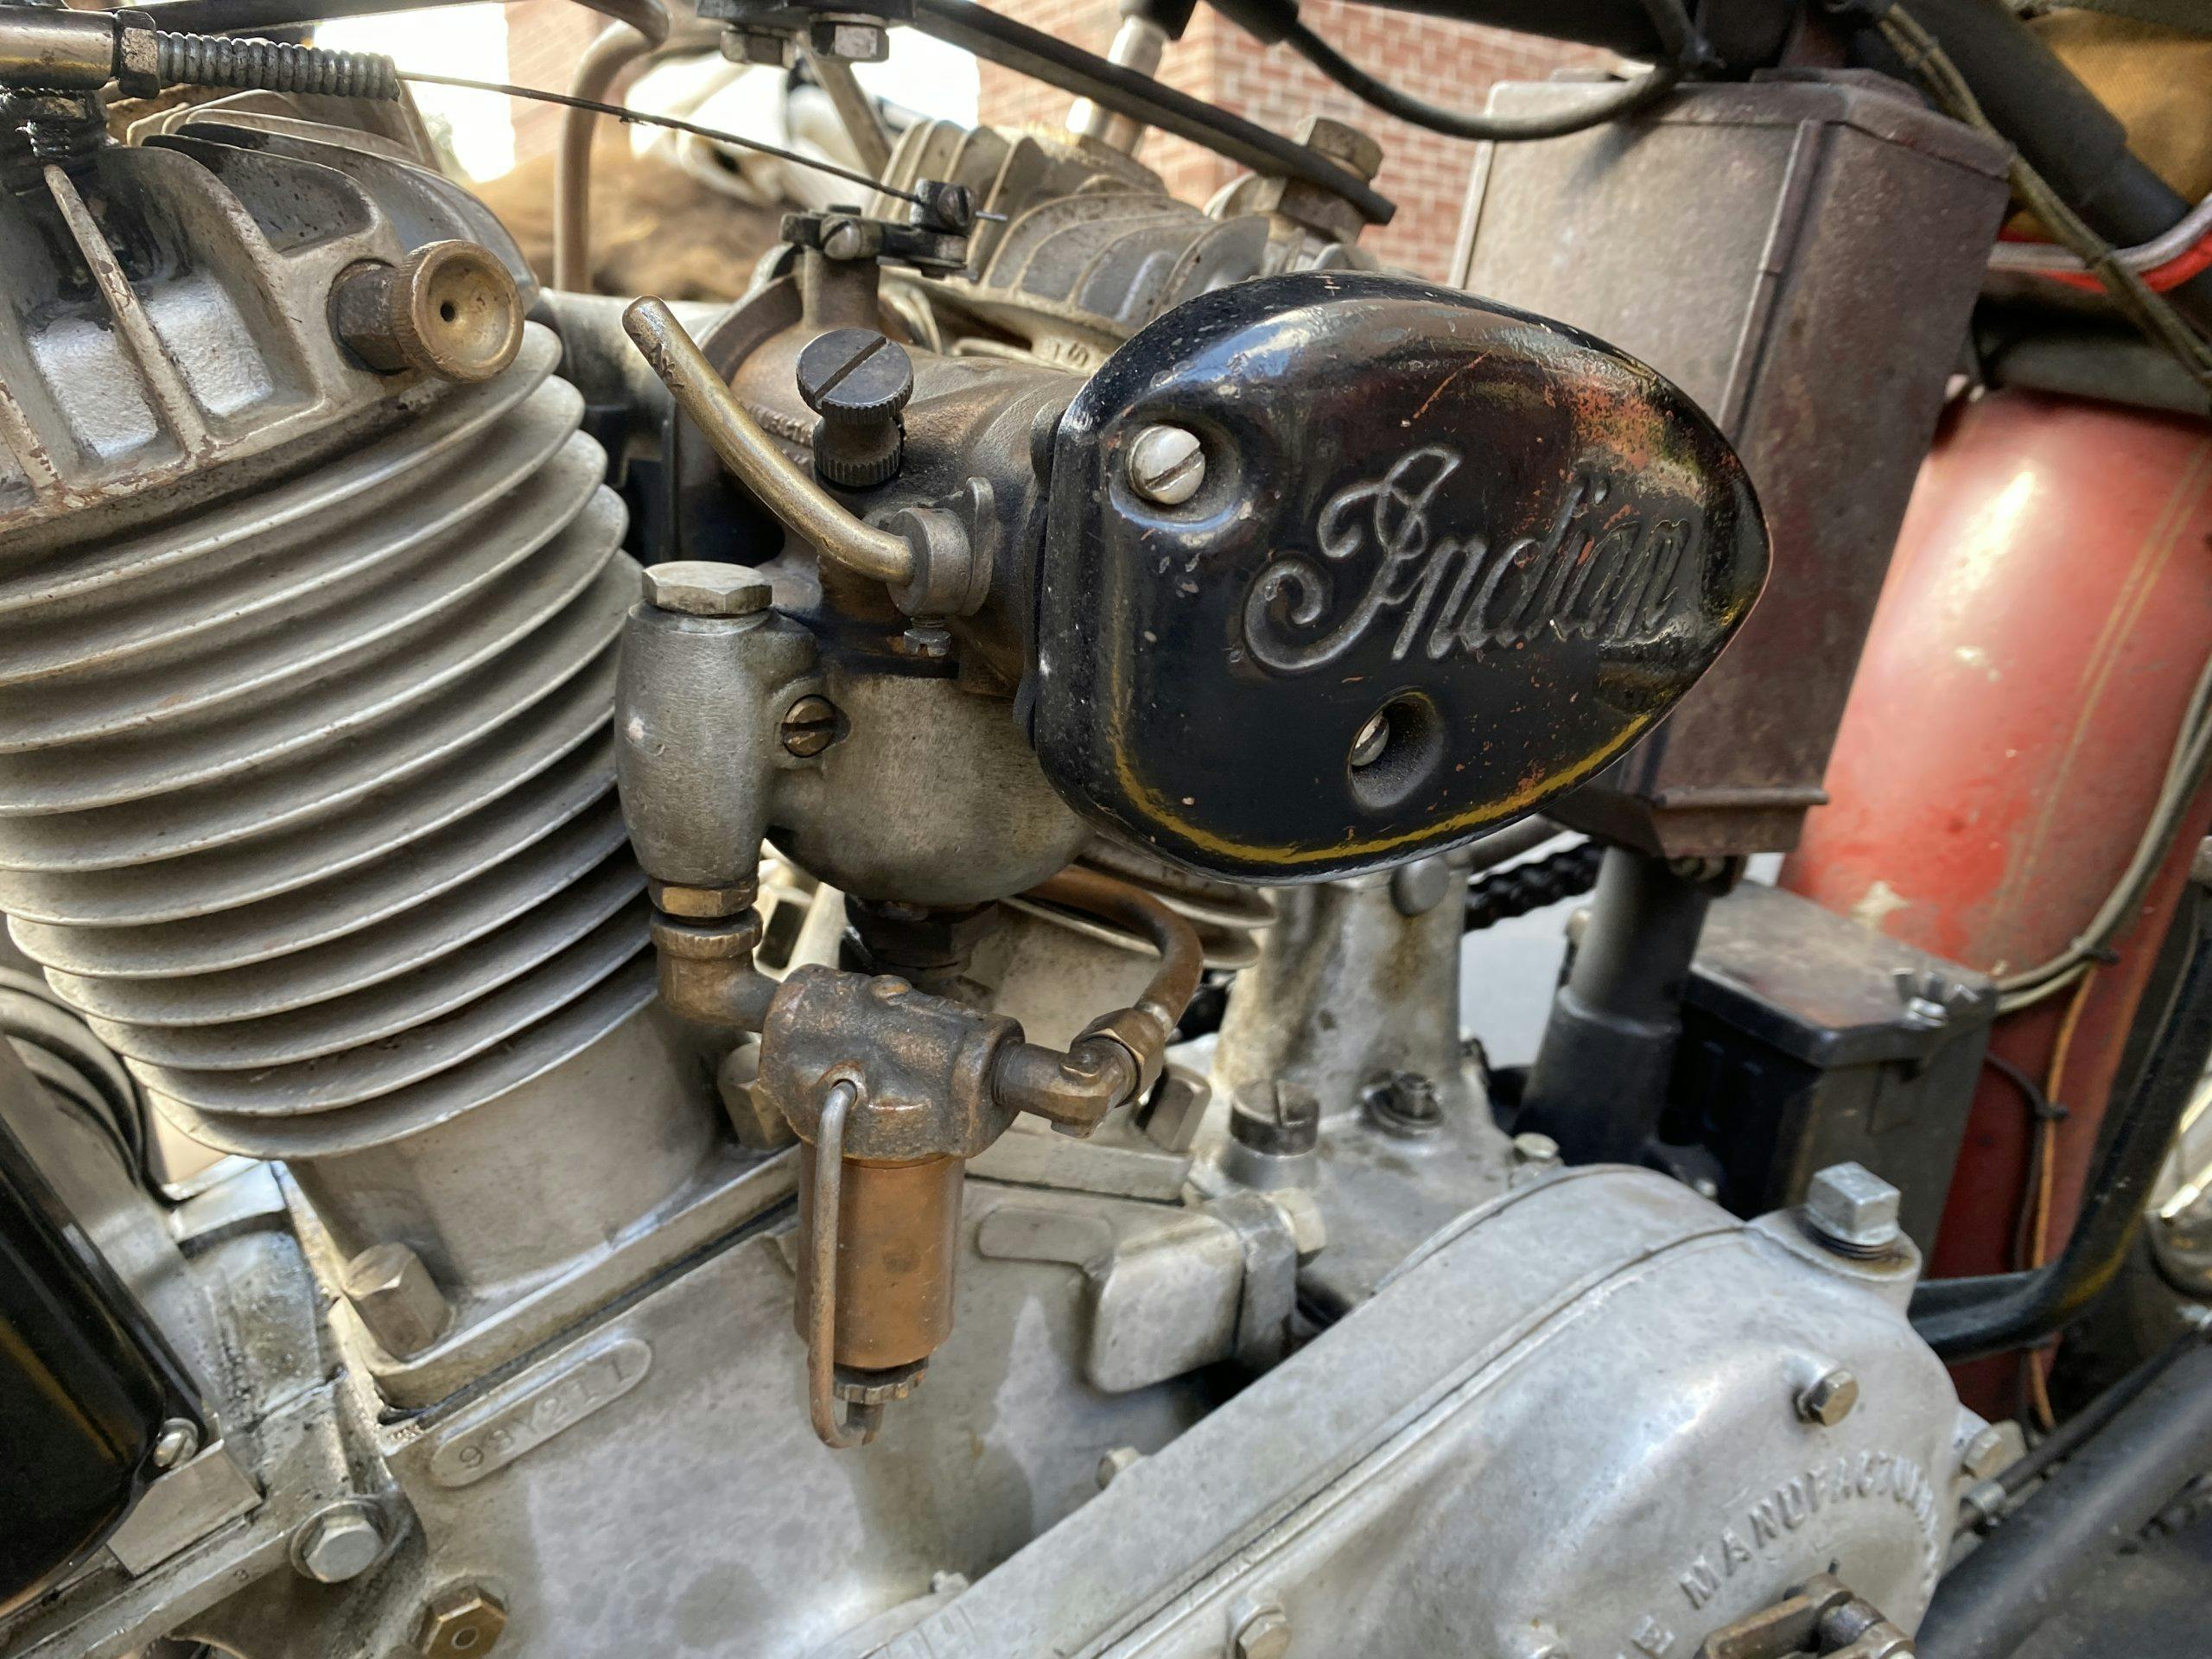 Motorcycle Cannonball Indian carb detail